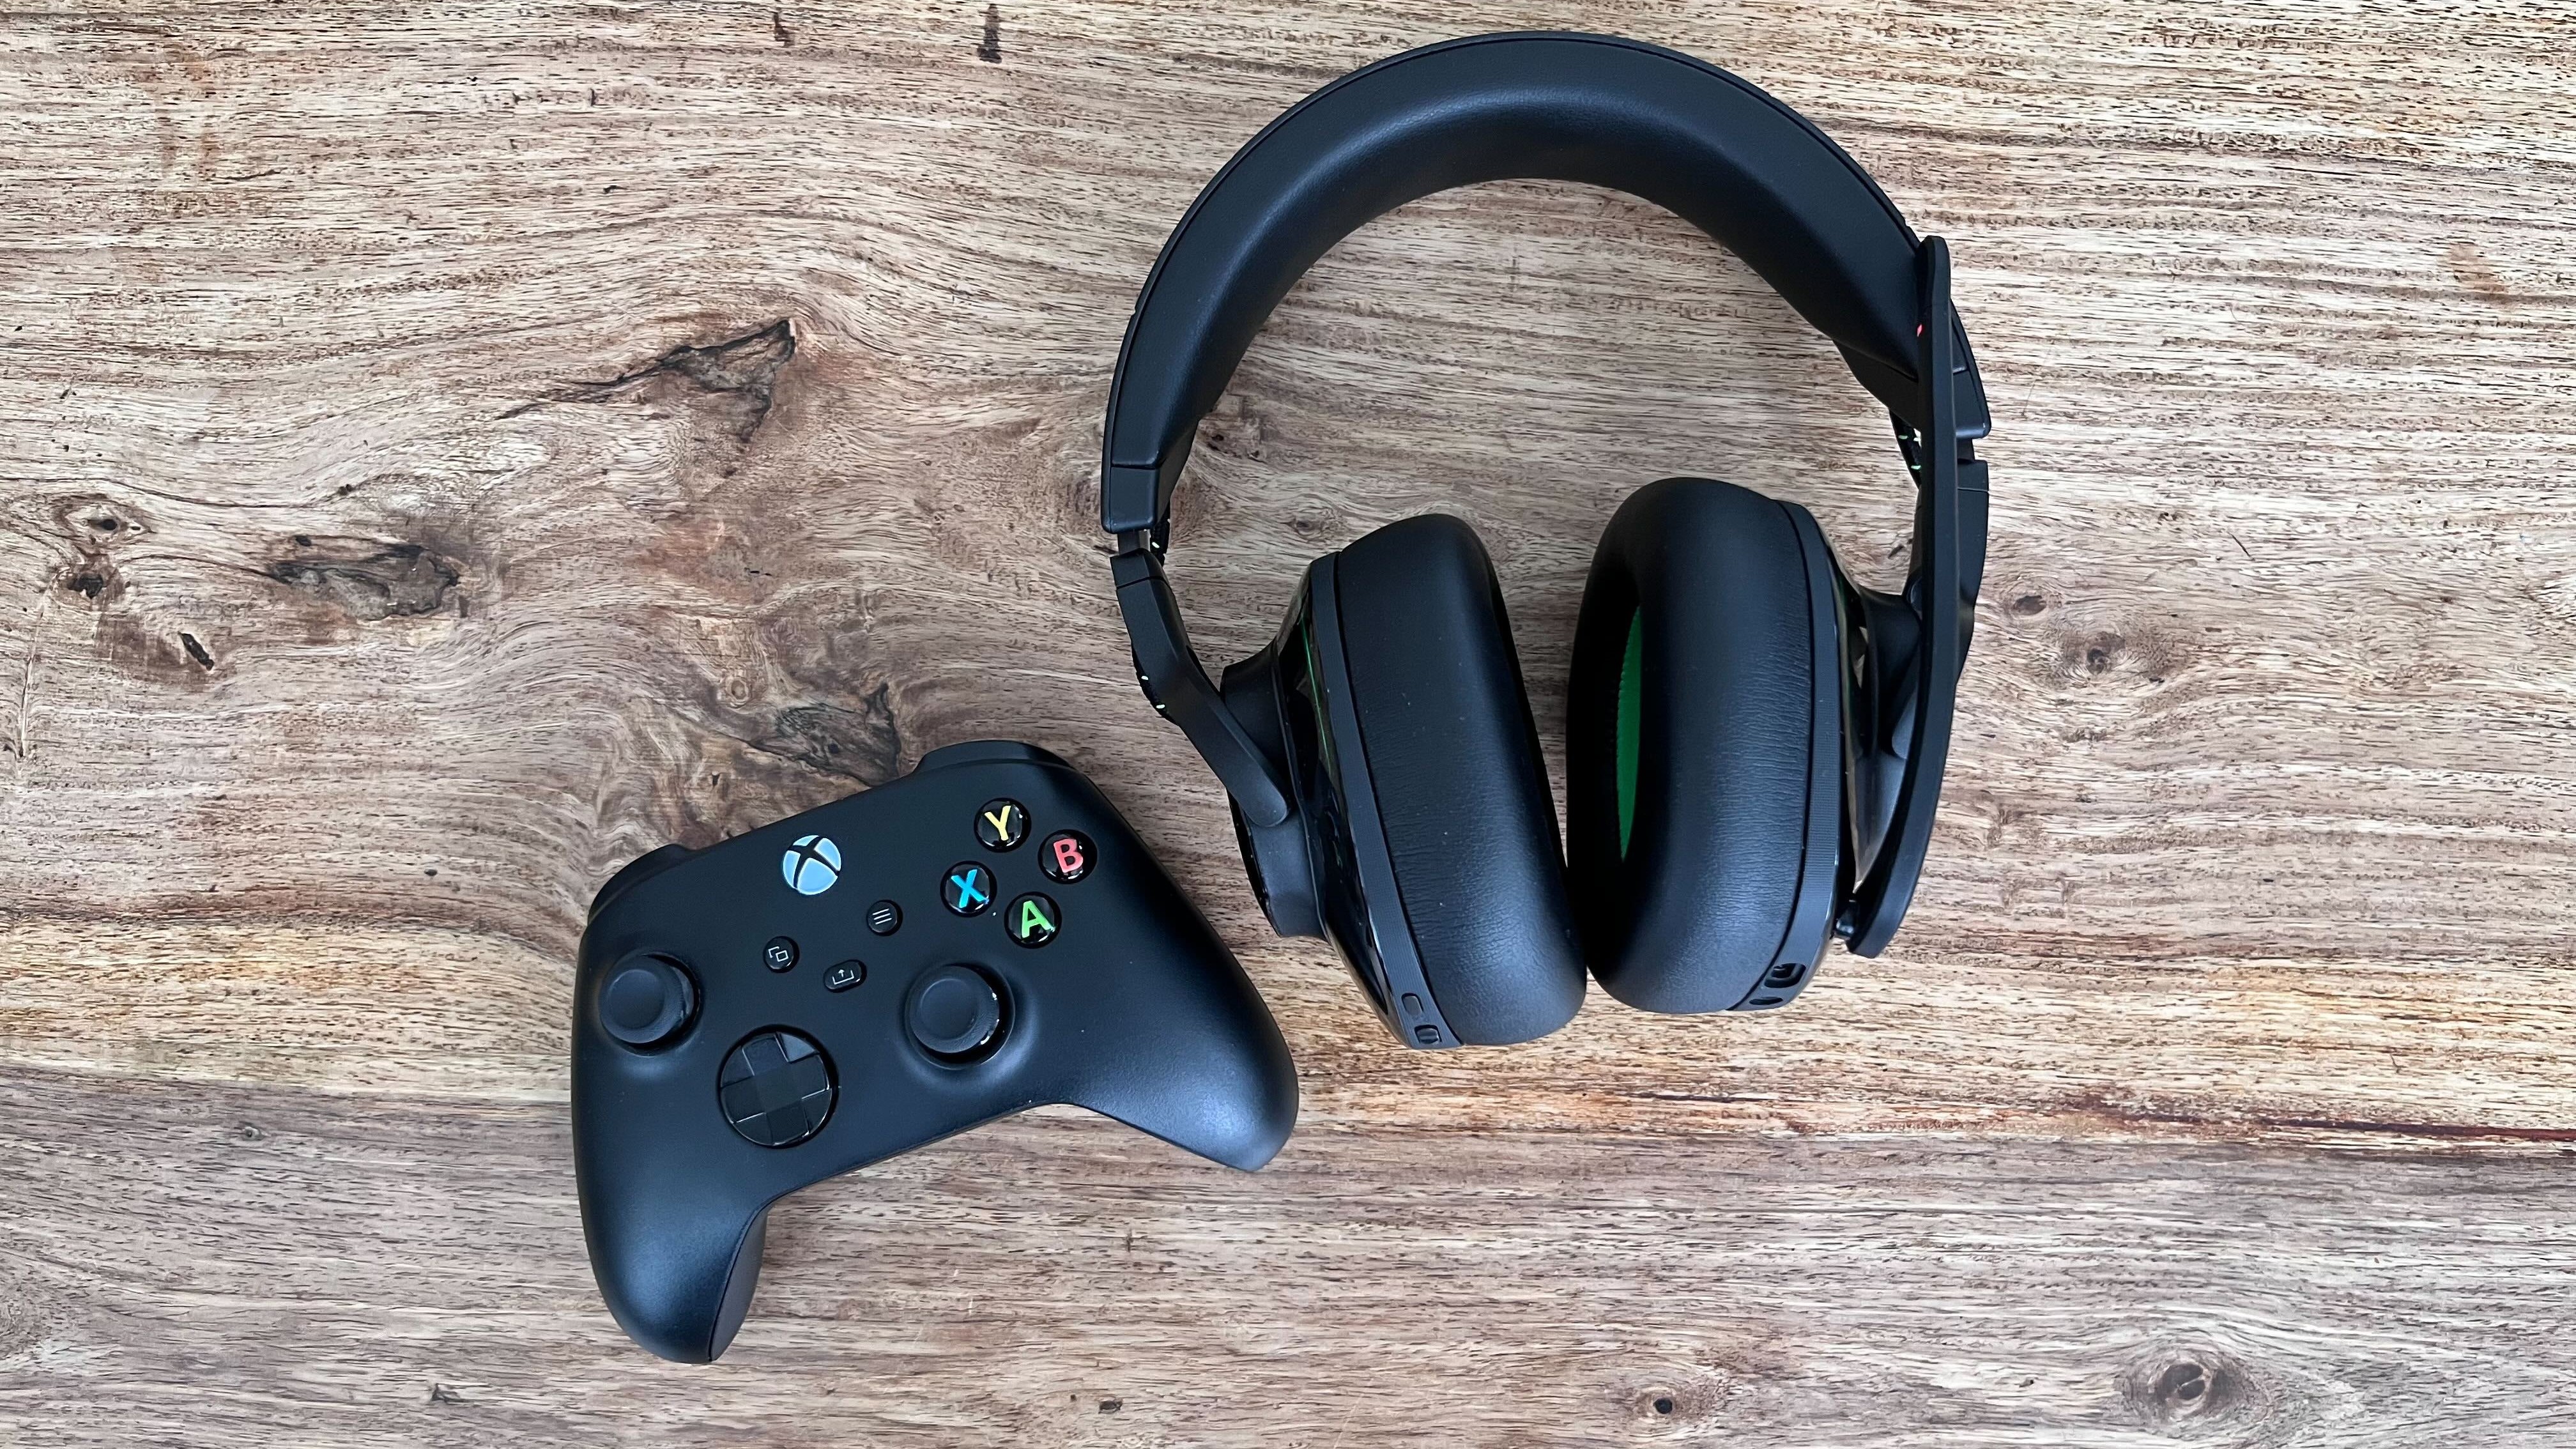 The JBL Quantum 910X on a wooden table placed next to a black Xbox controller.